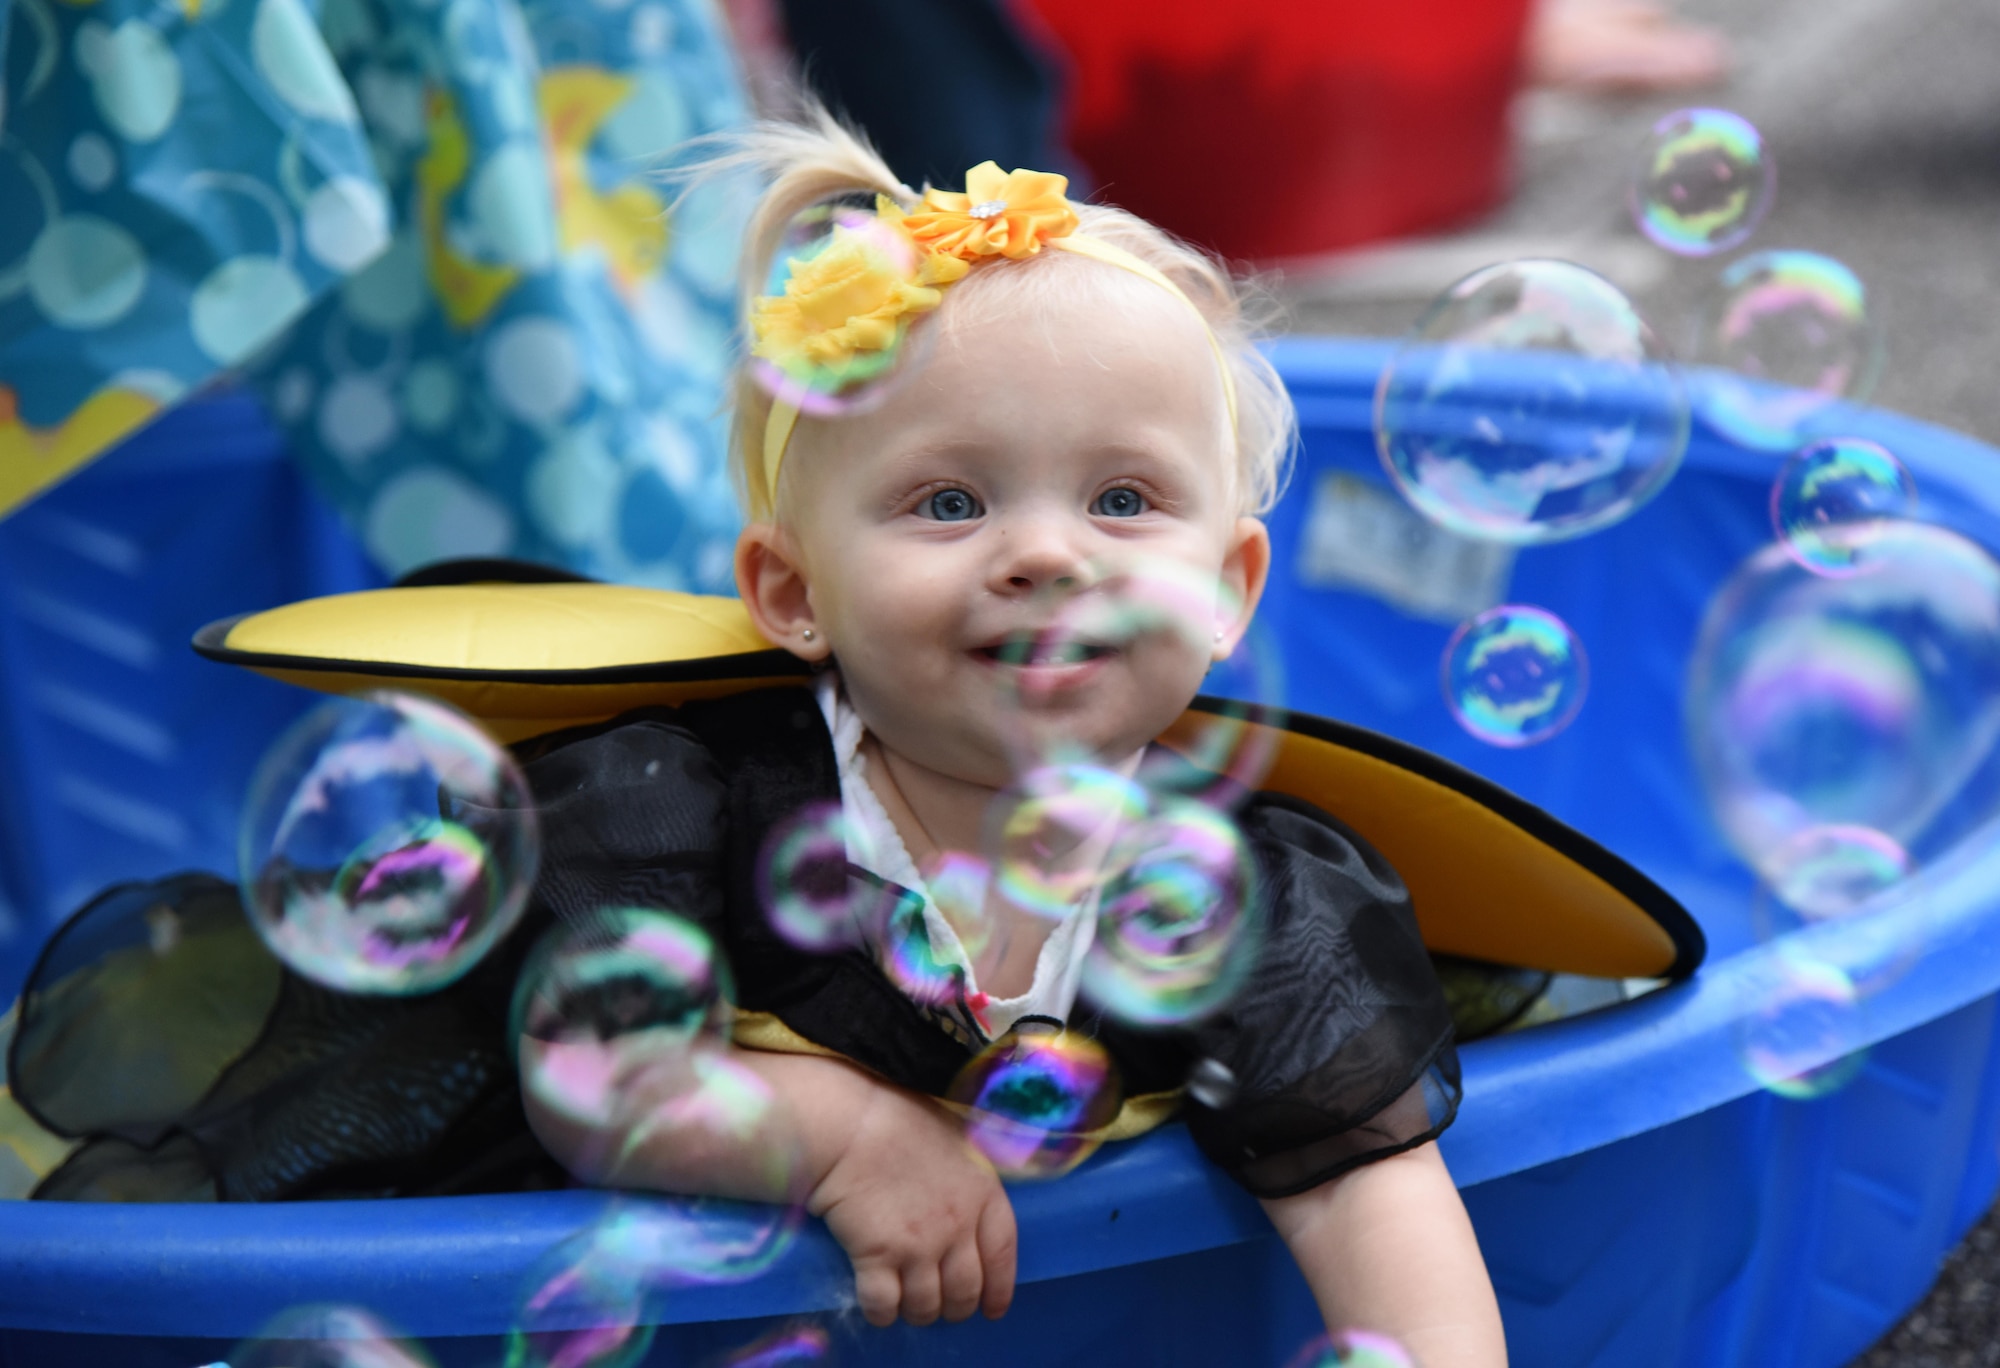 Quinn Ten Haken, daughter of Capt. Jason Ten Haken, 333rd Training Squadron instructor, portrays a bumble bee during Ghouls in the Park at Marina Park Oct. 27, 2017, on Keesler Air Force Base, Mississippi. Ghouls in the Park also featured an alien bus, a haunted house, “Trunk or Treat” and games for children of all ages. (U.S. Air Force photo by Kemberly Groue)